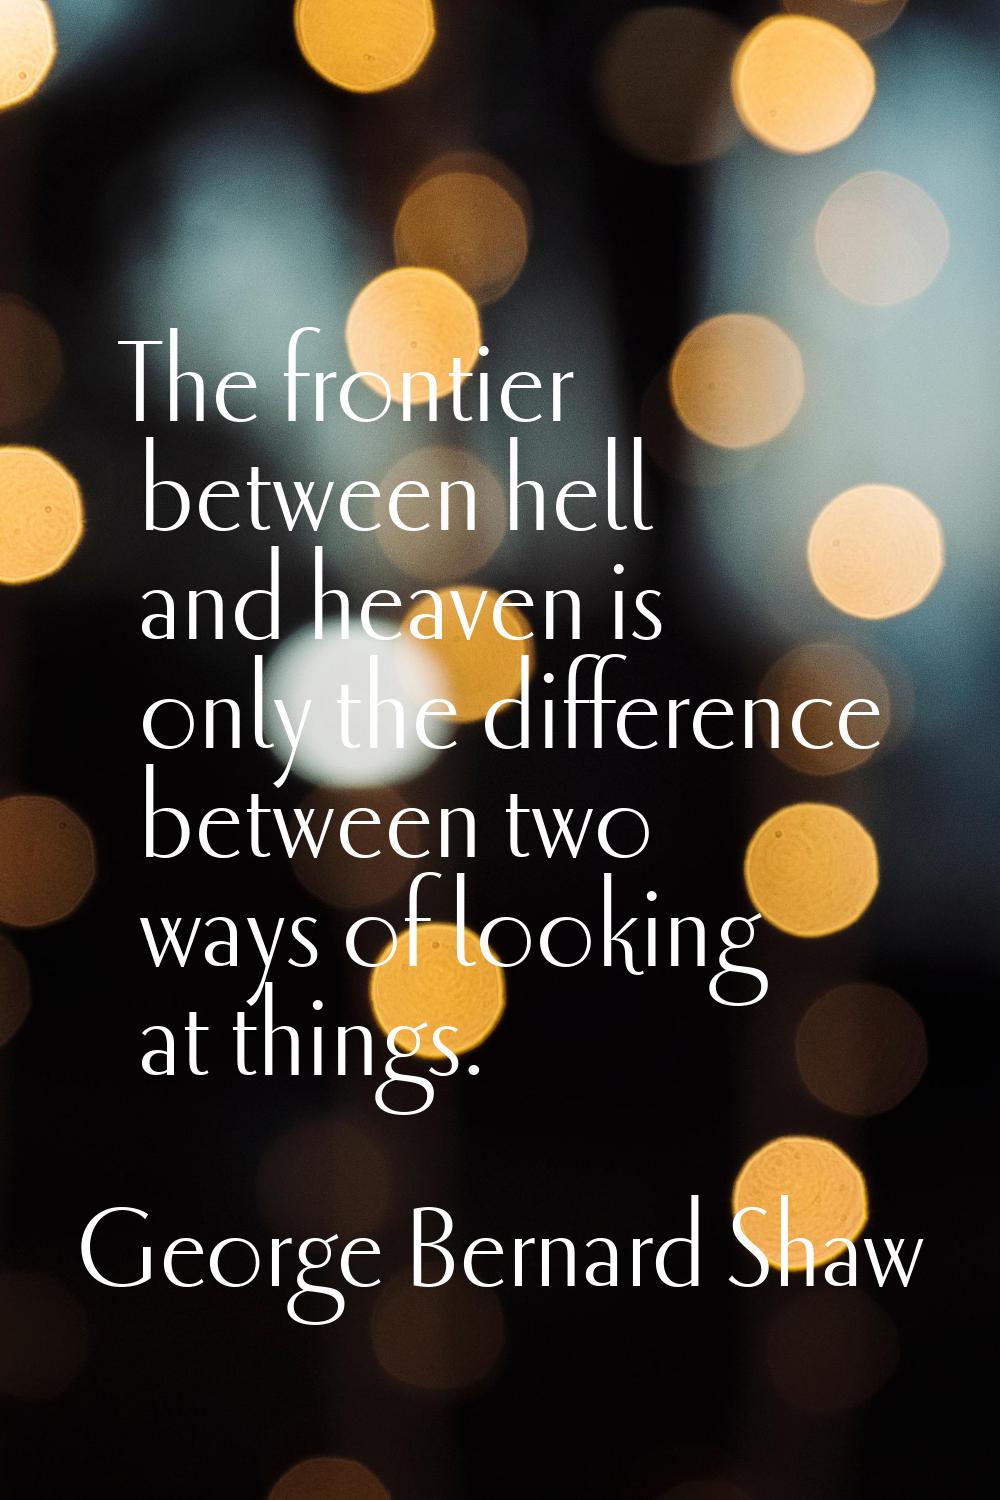 The frontier between hell and heaven is only the difference between two ways of looking at things.